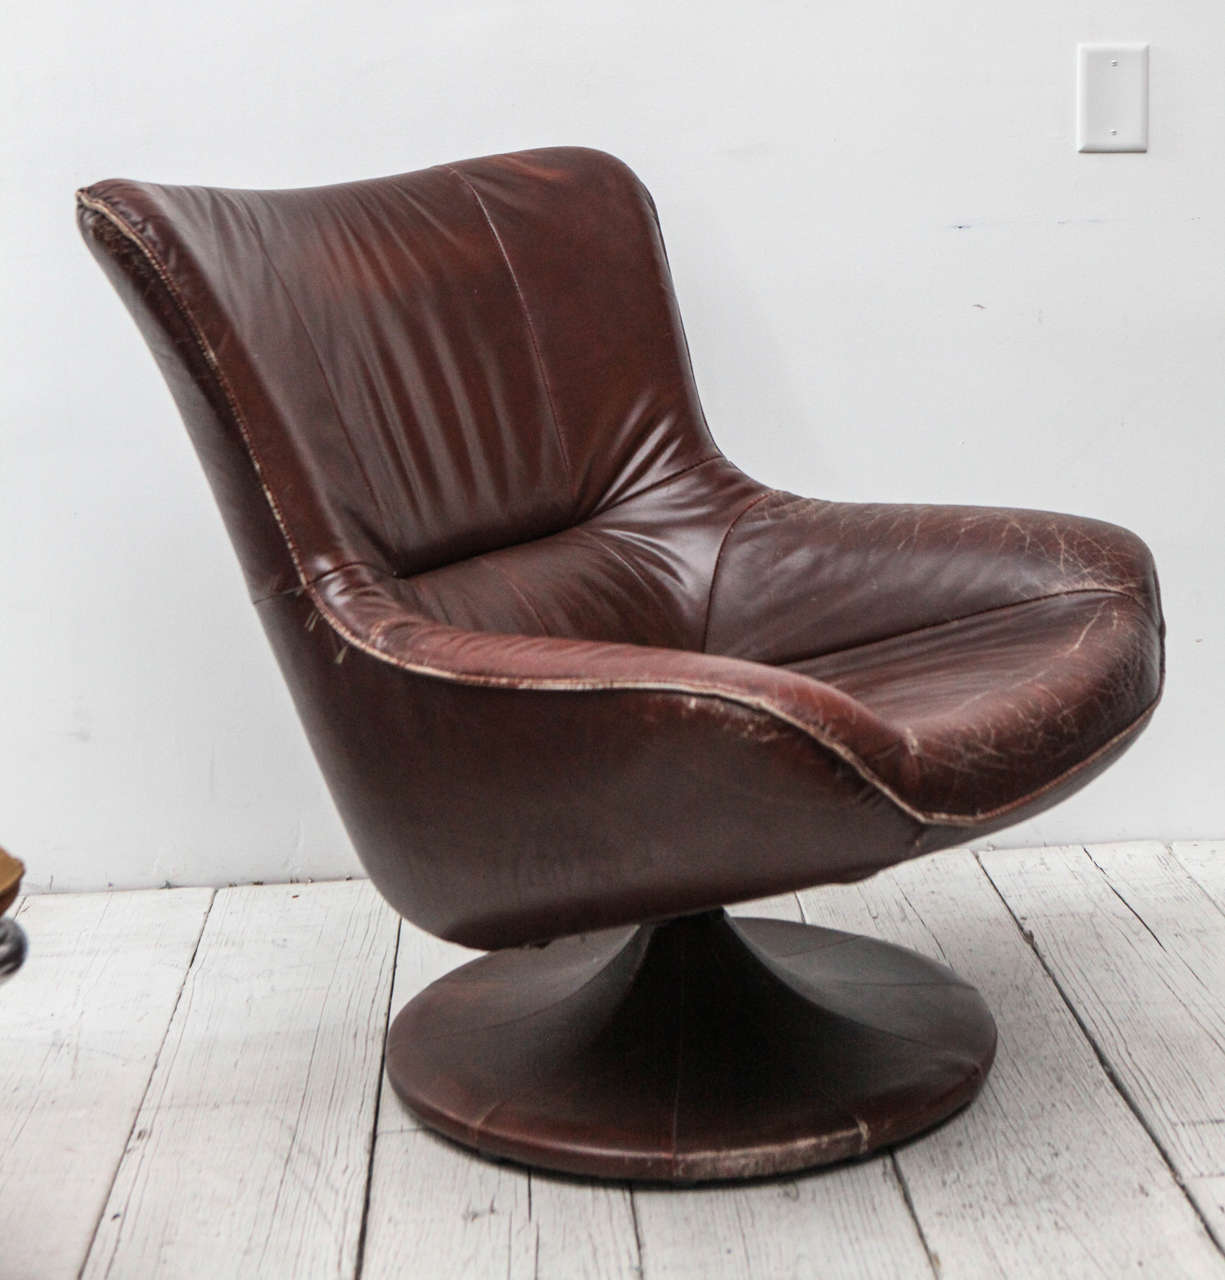 Leather wrapped swivel chair.